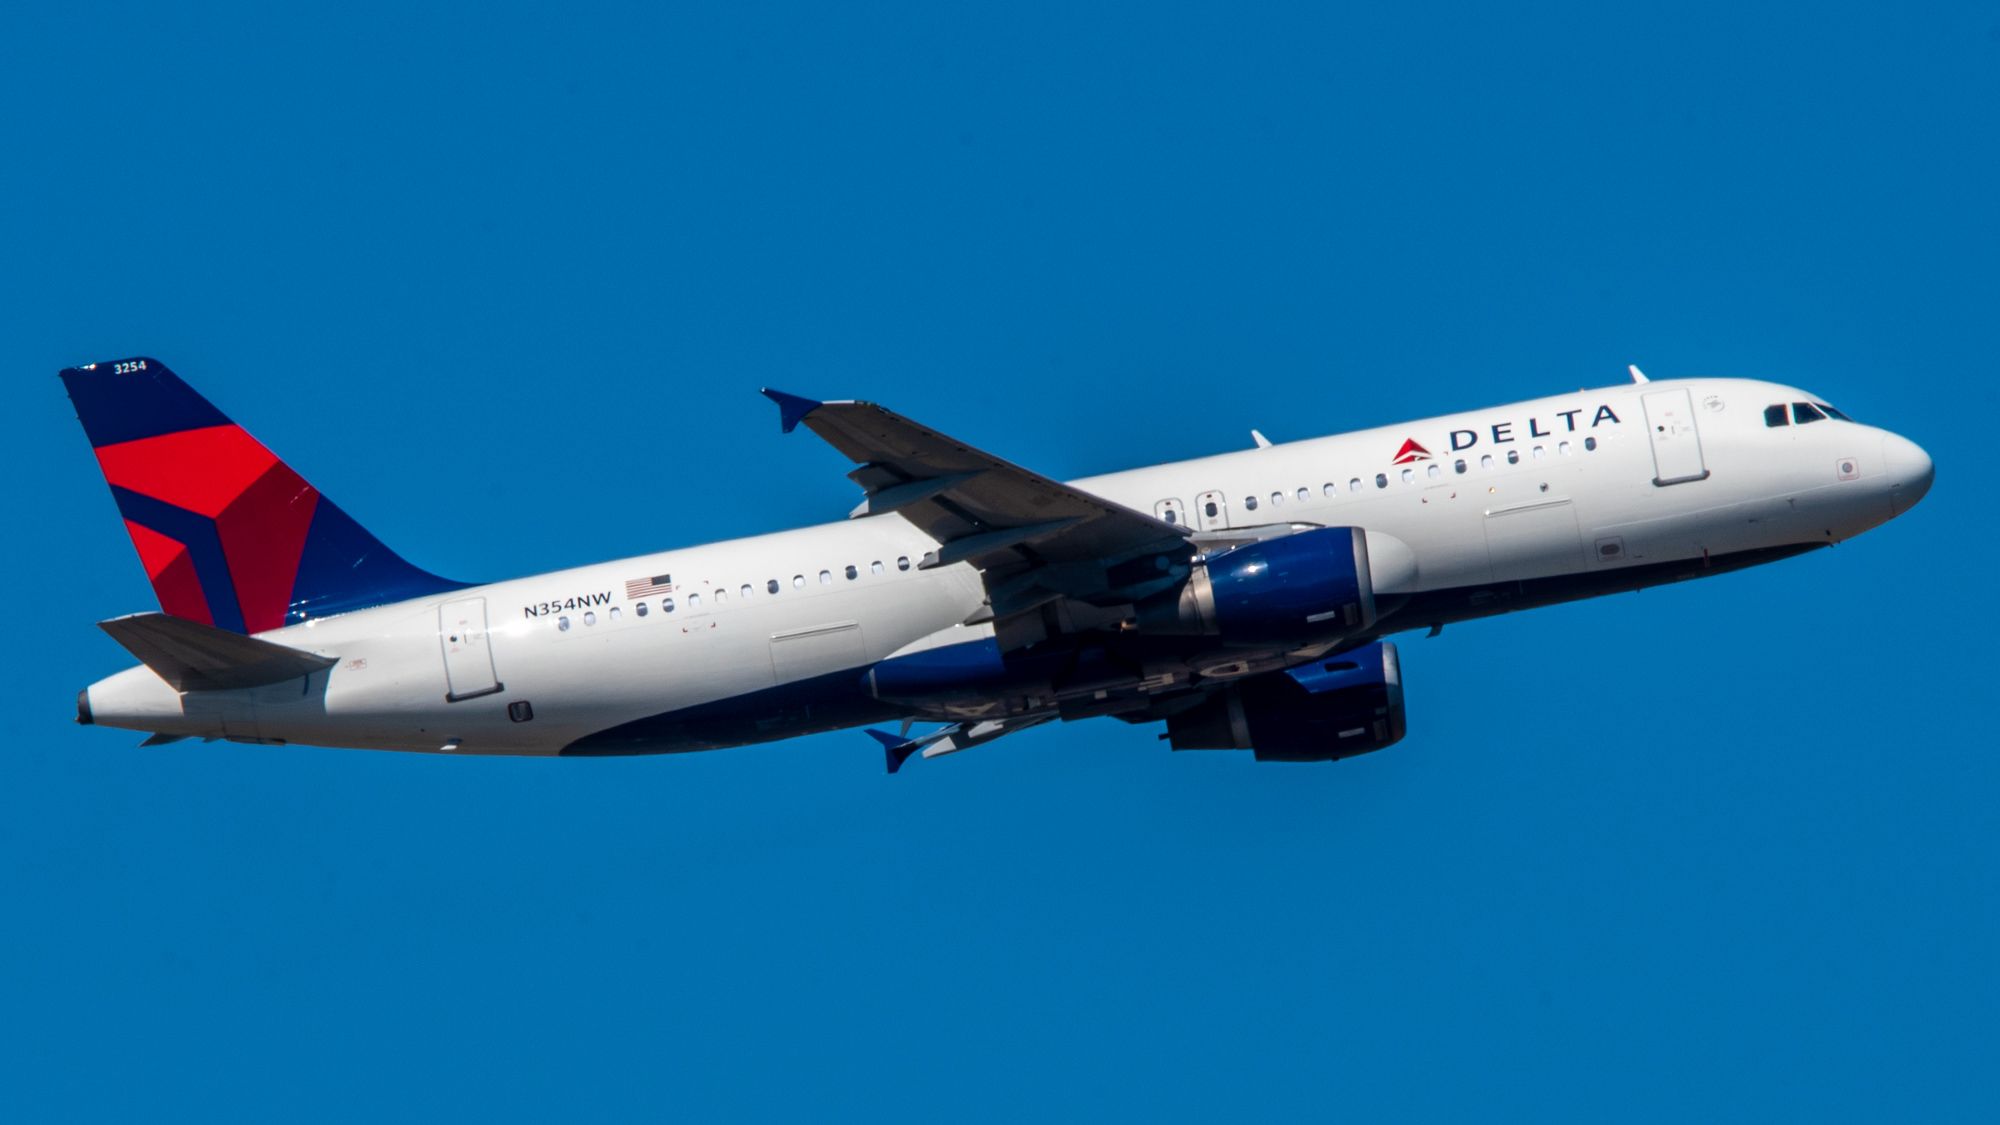 White jetliner with Delta Airlines logo on side and tail ascending in blue sky